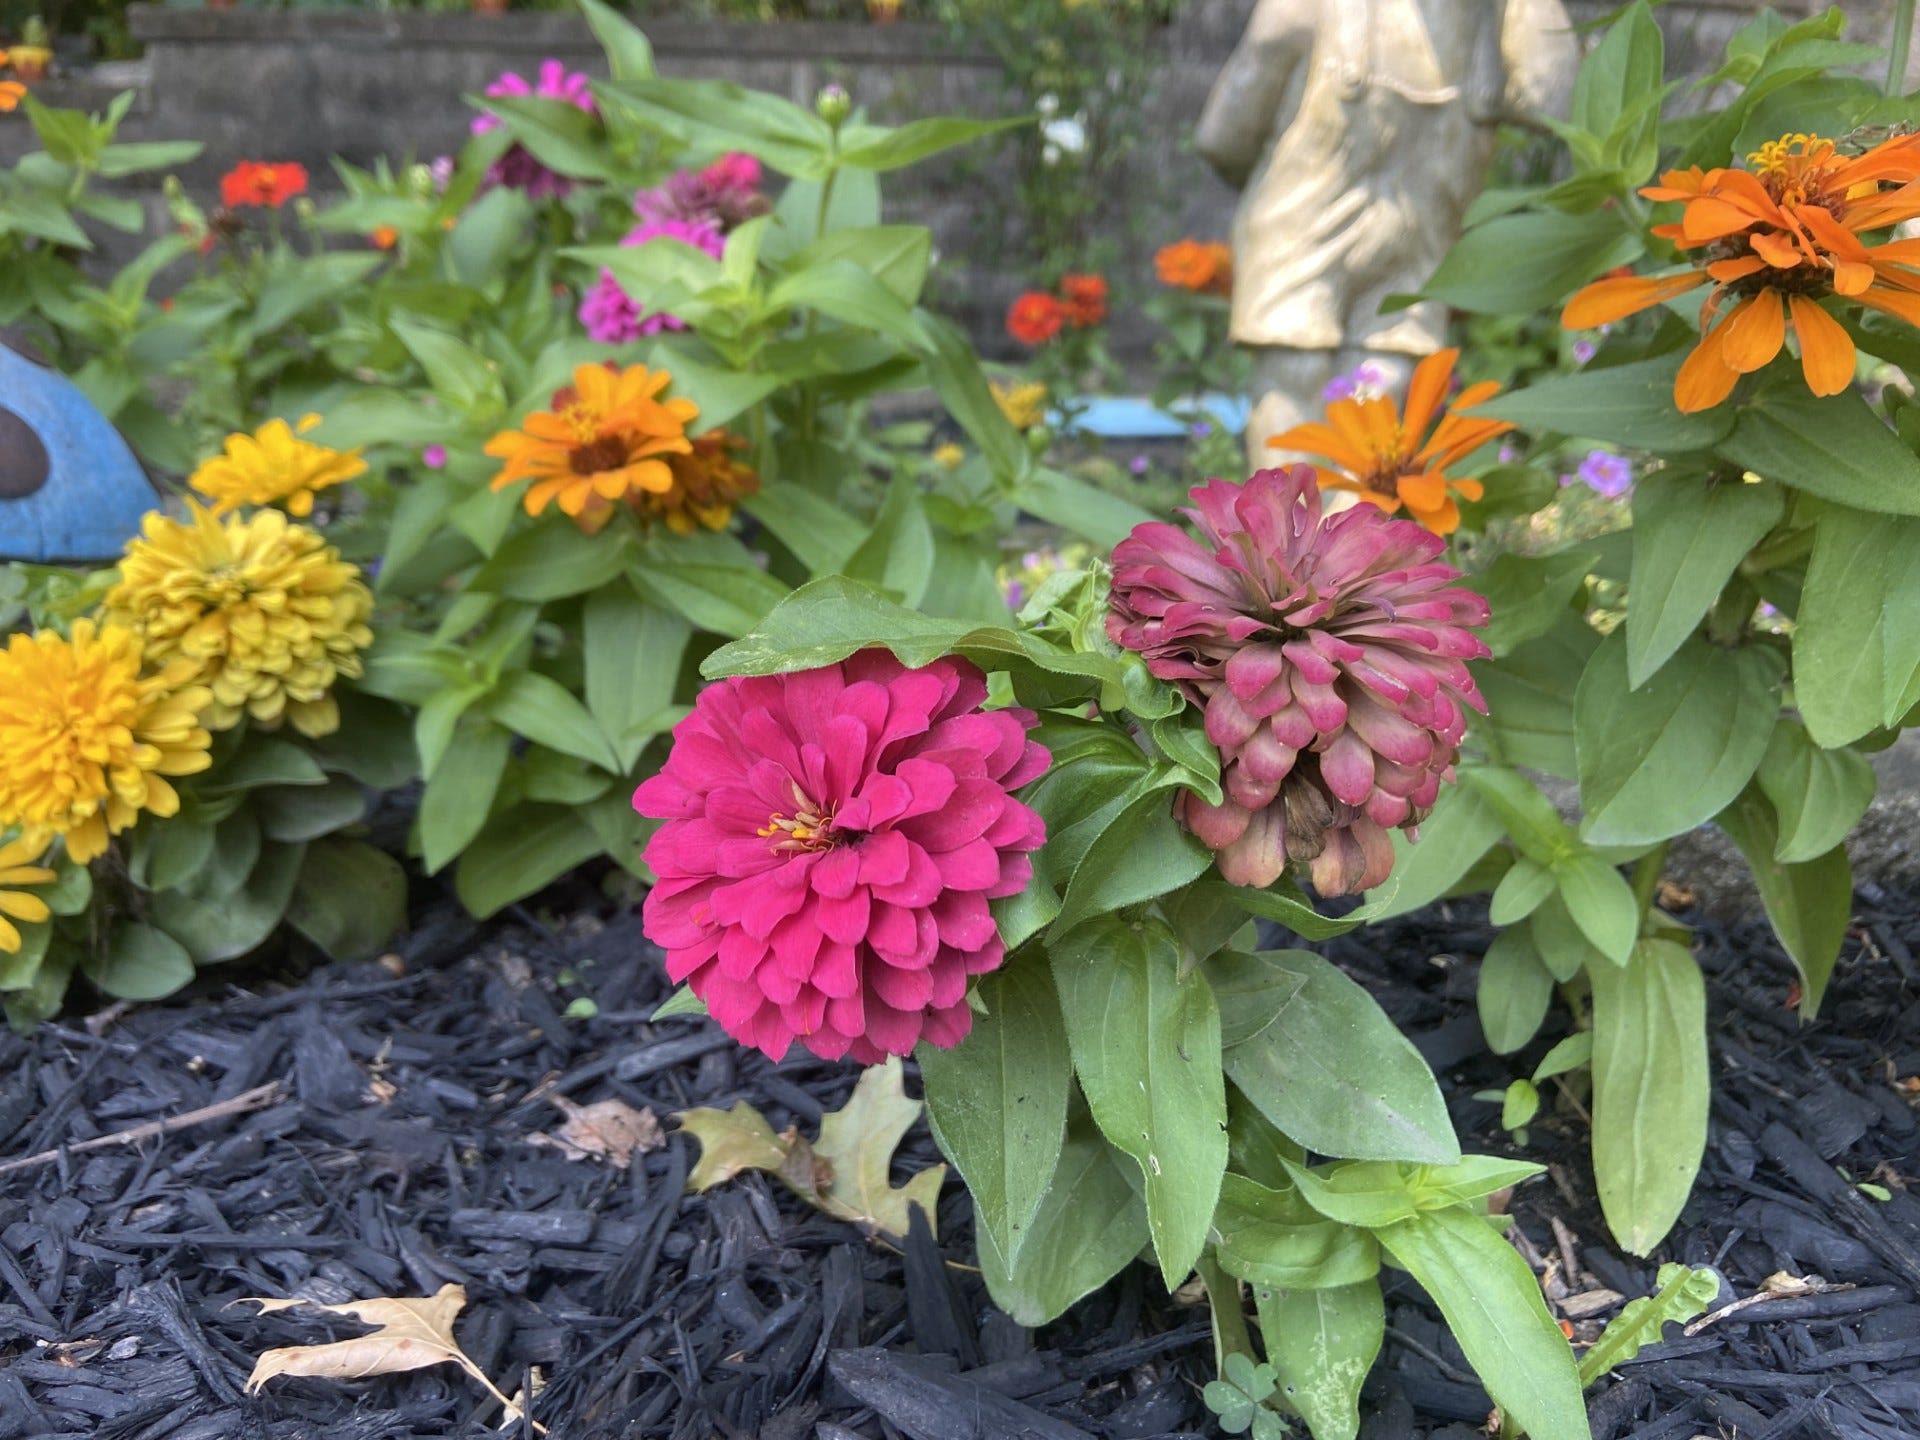 For the bees and butterflies: Bible study leads to local wave of zinnias